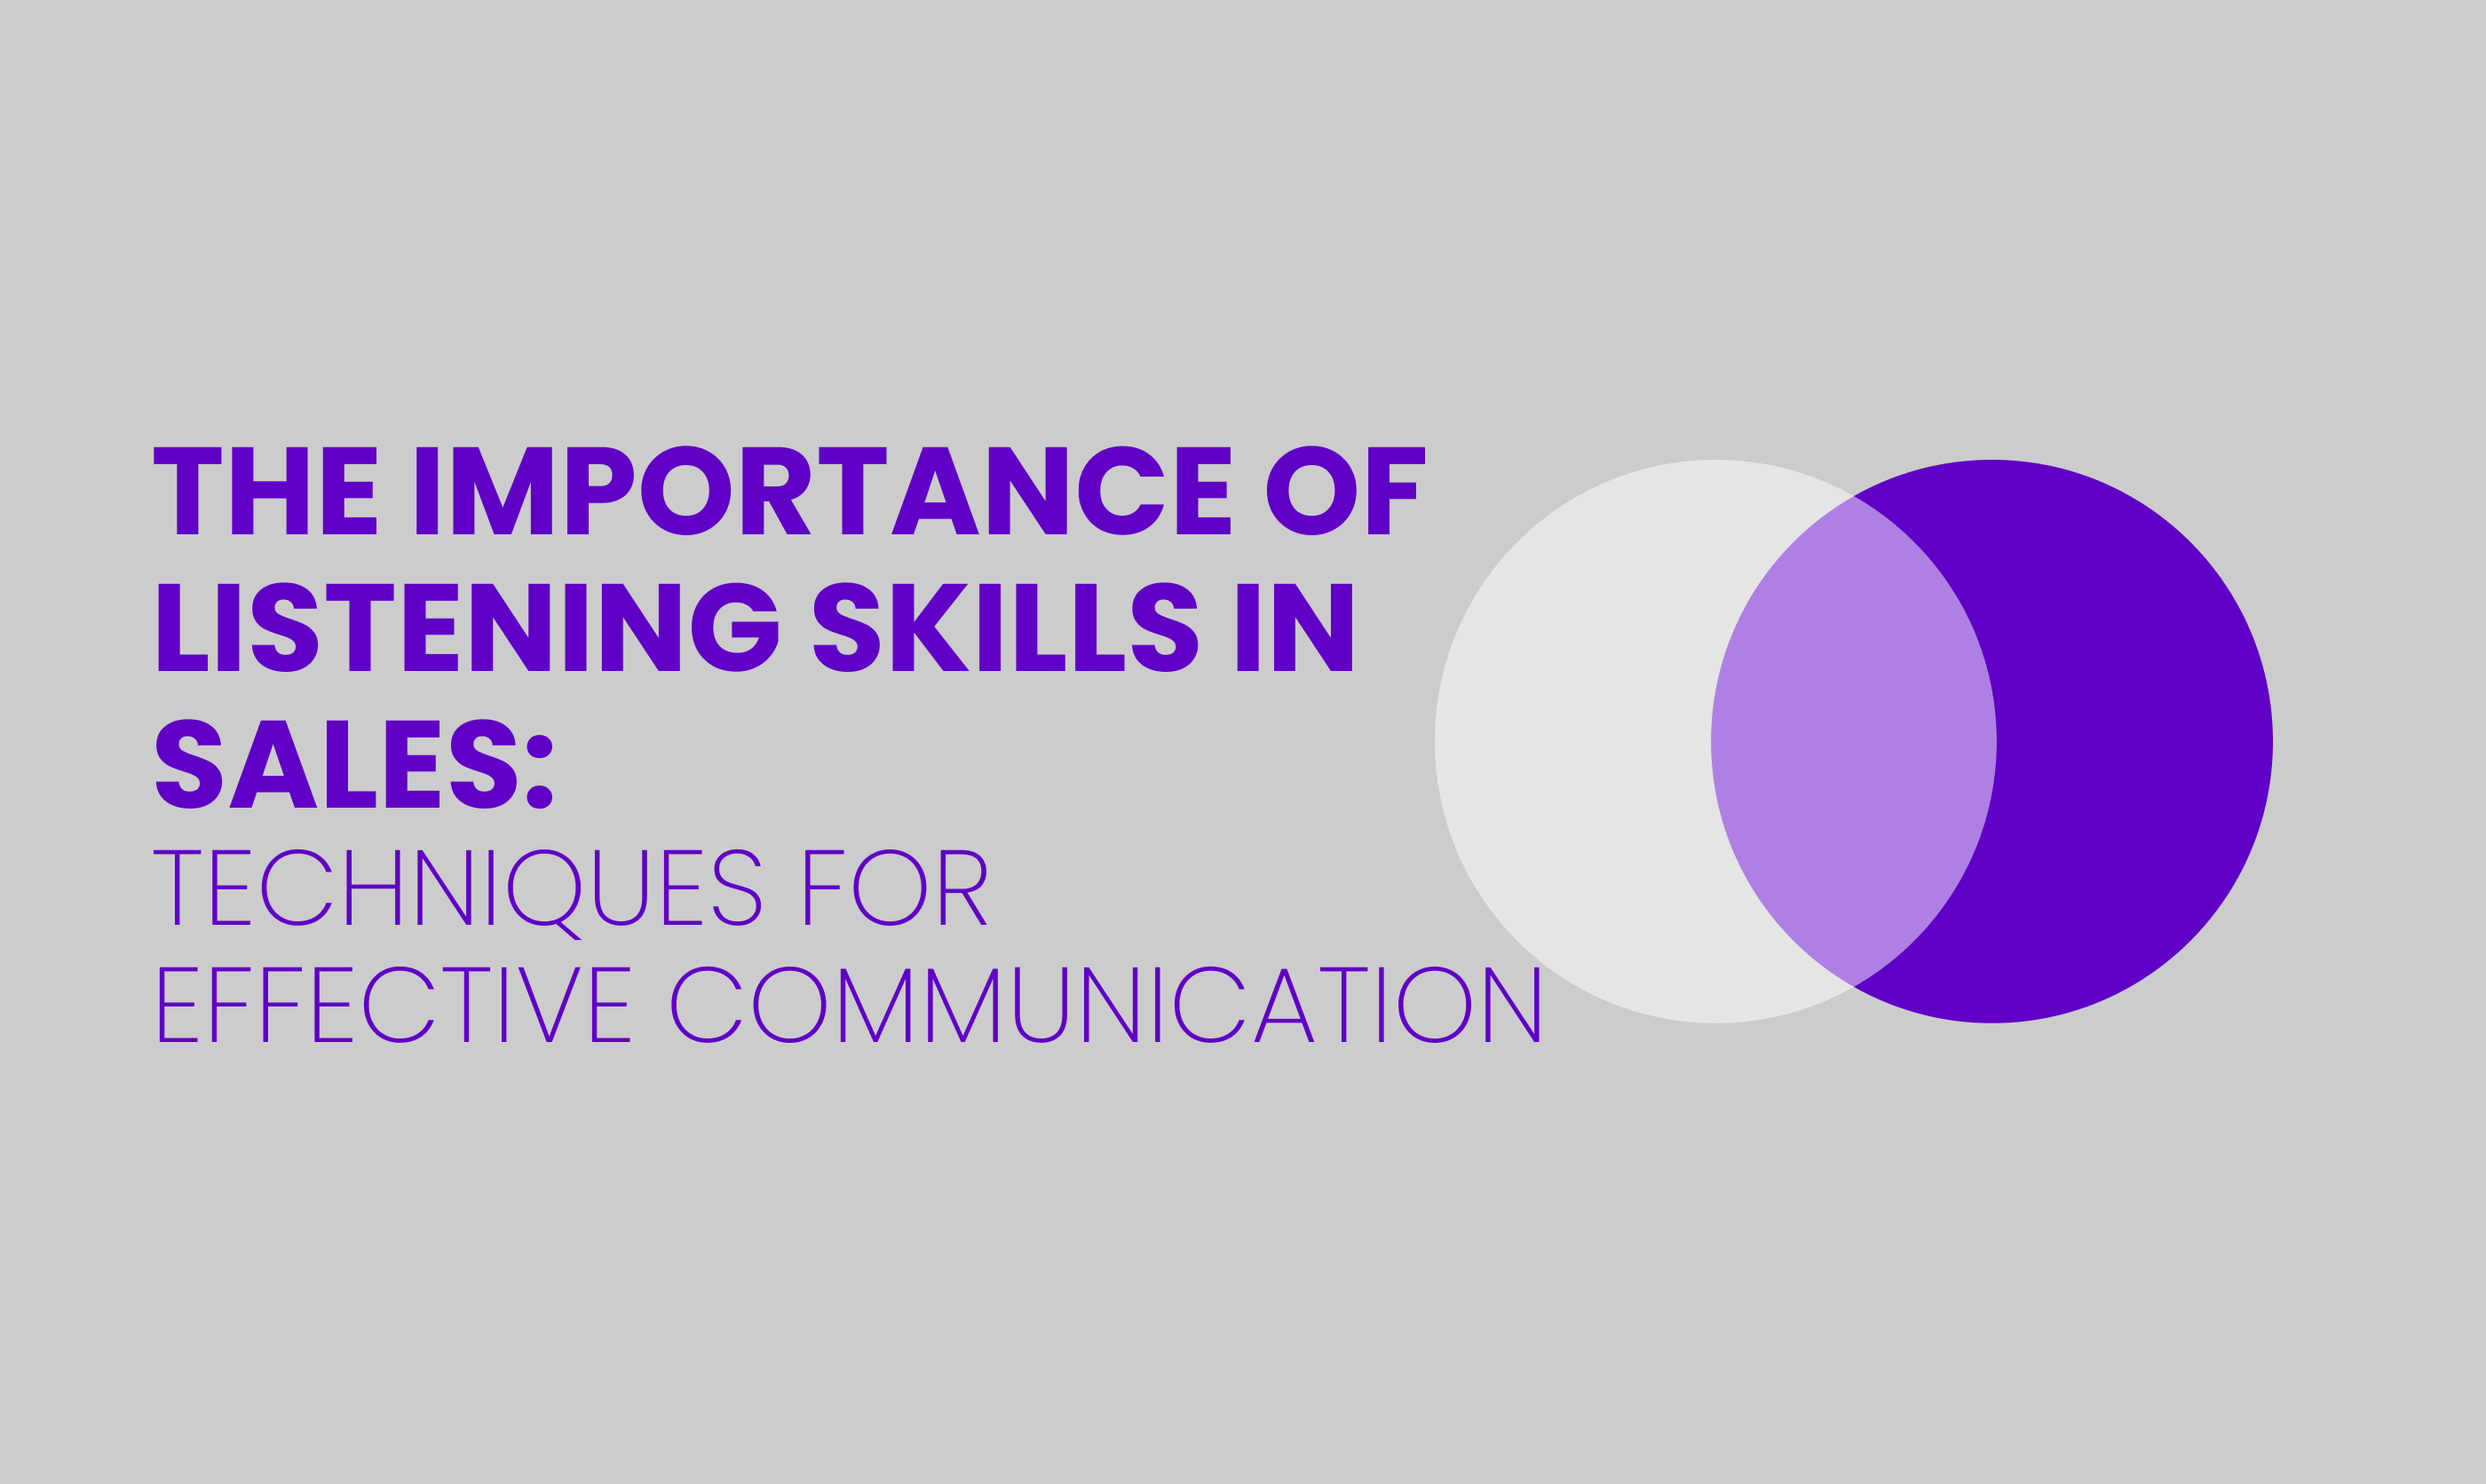 THE IMPORTANCE OF LISTENING SKILLS IN SALES:  TECHNIQUES FOR  EFFECTIVE COMMUNICATION